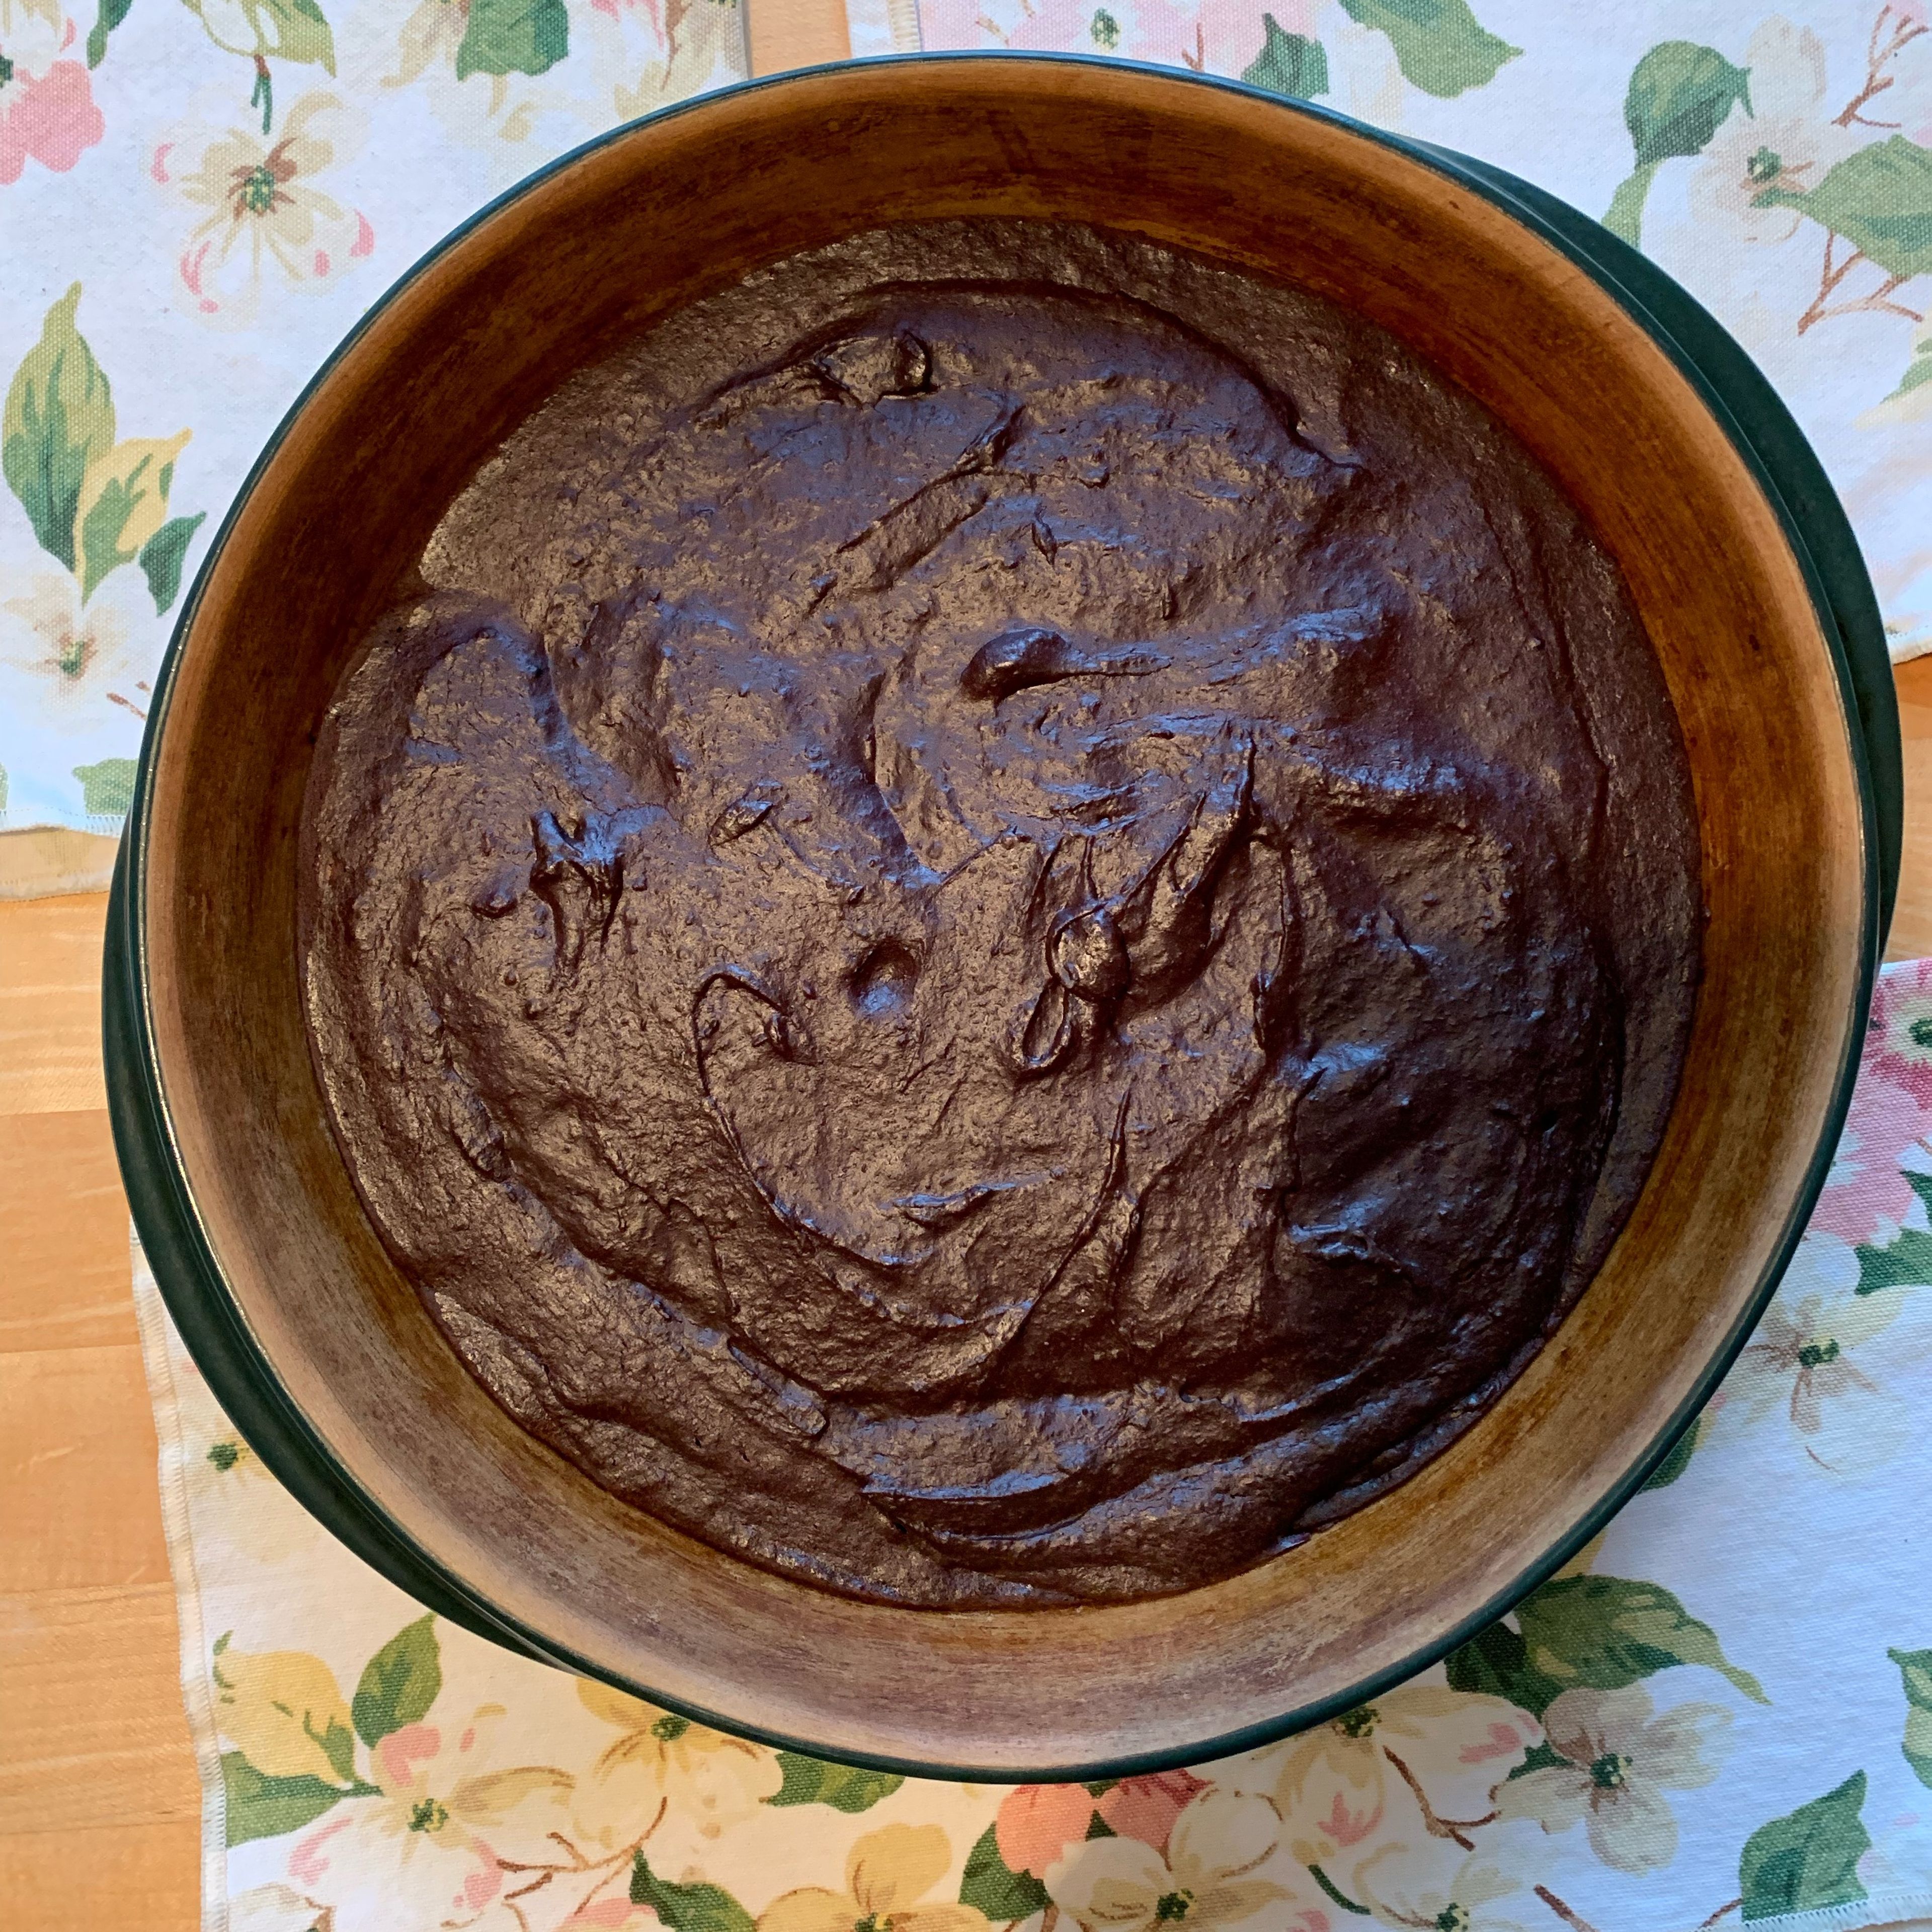 Verify Brownie Batter Puffed Up. The Surface Should Be Dry. The Batter Should No Longer Be Jiggly, but Should Feel Soft and Not Firm When Pressed.